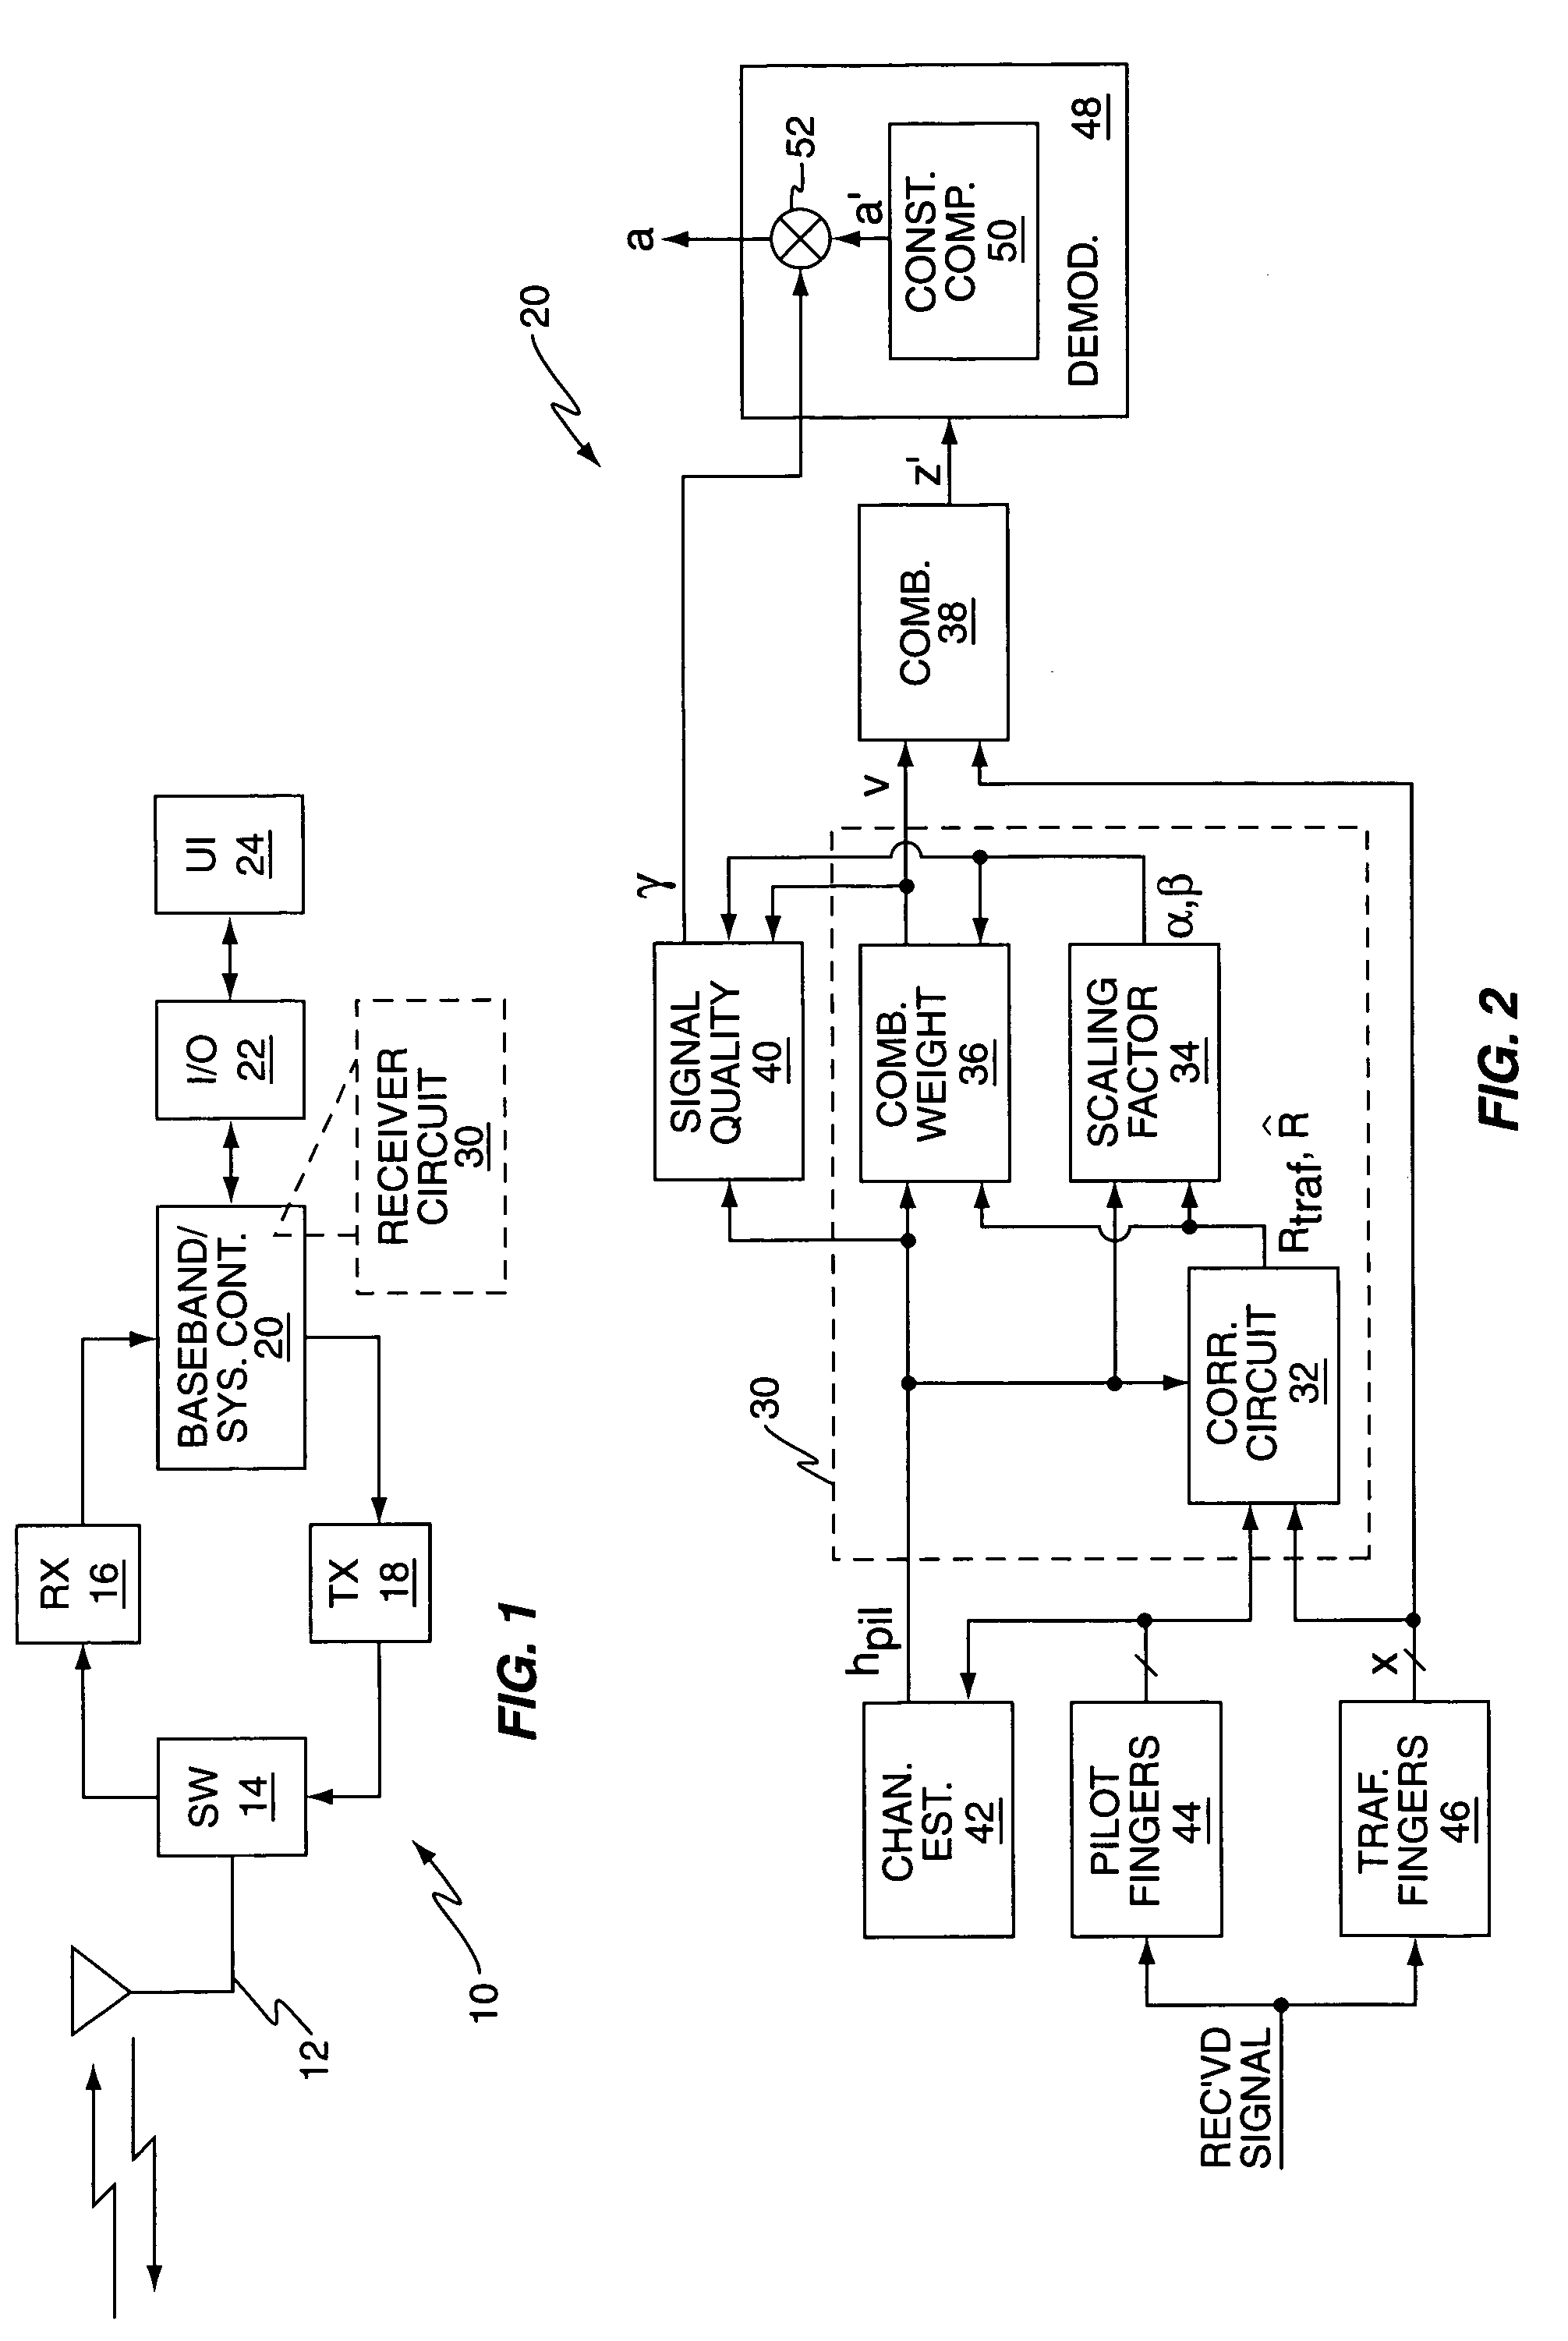 Method and apparatus for received communication signal processing